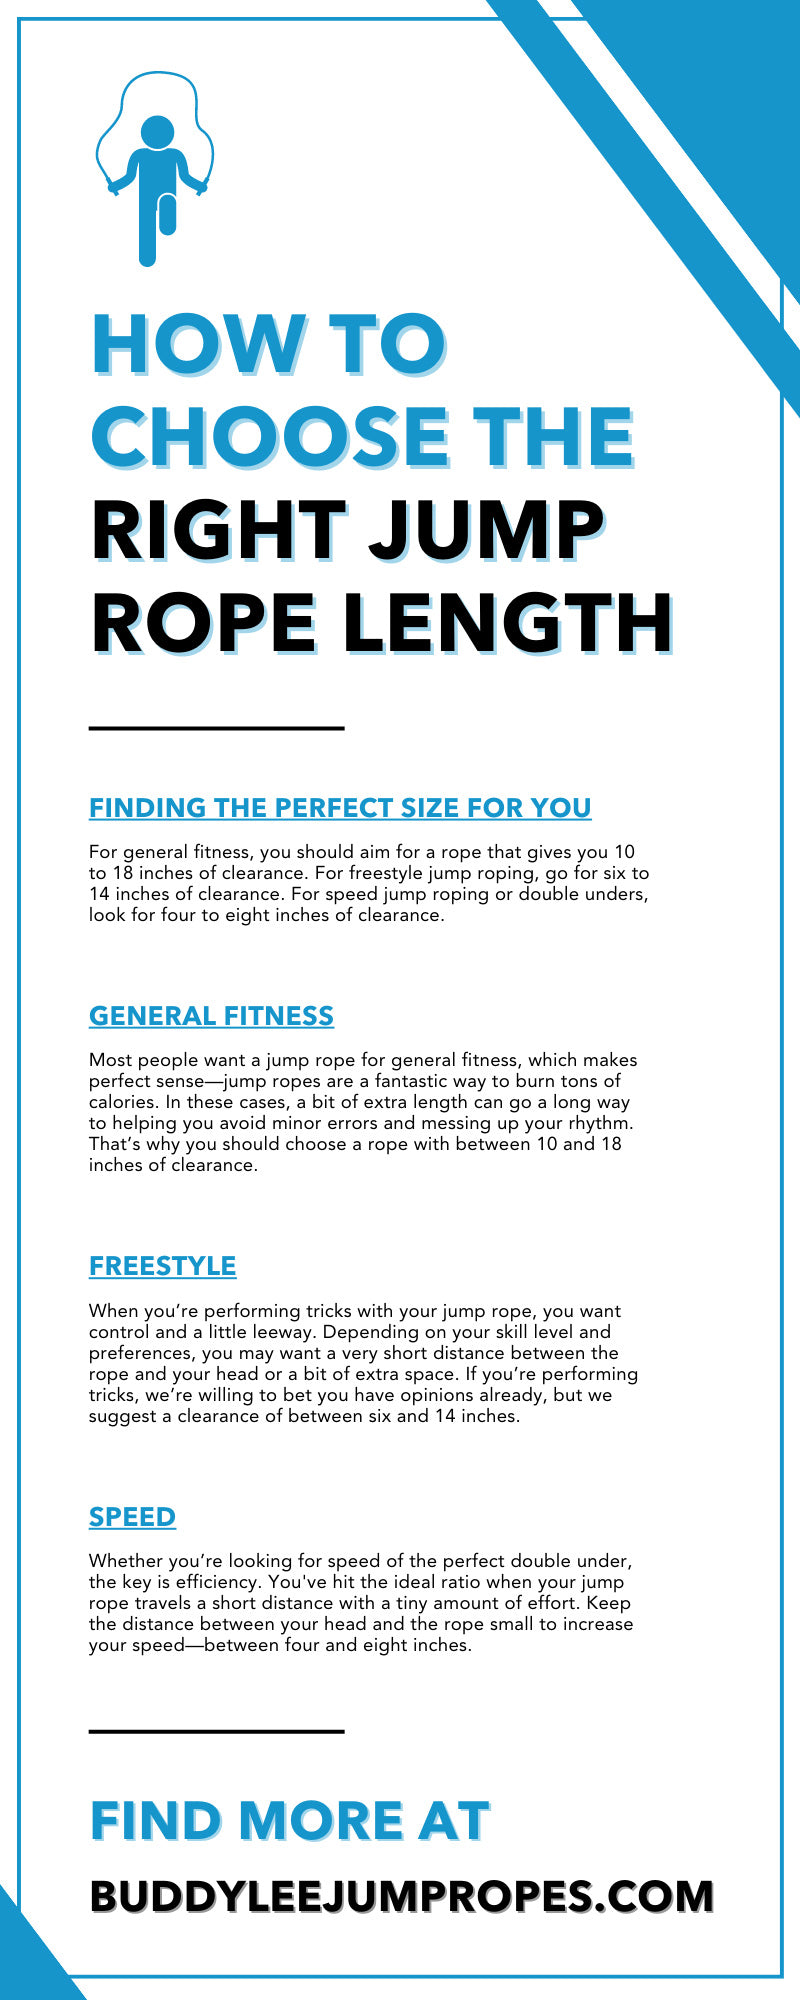 How To Choose the Right Jump Rope Length